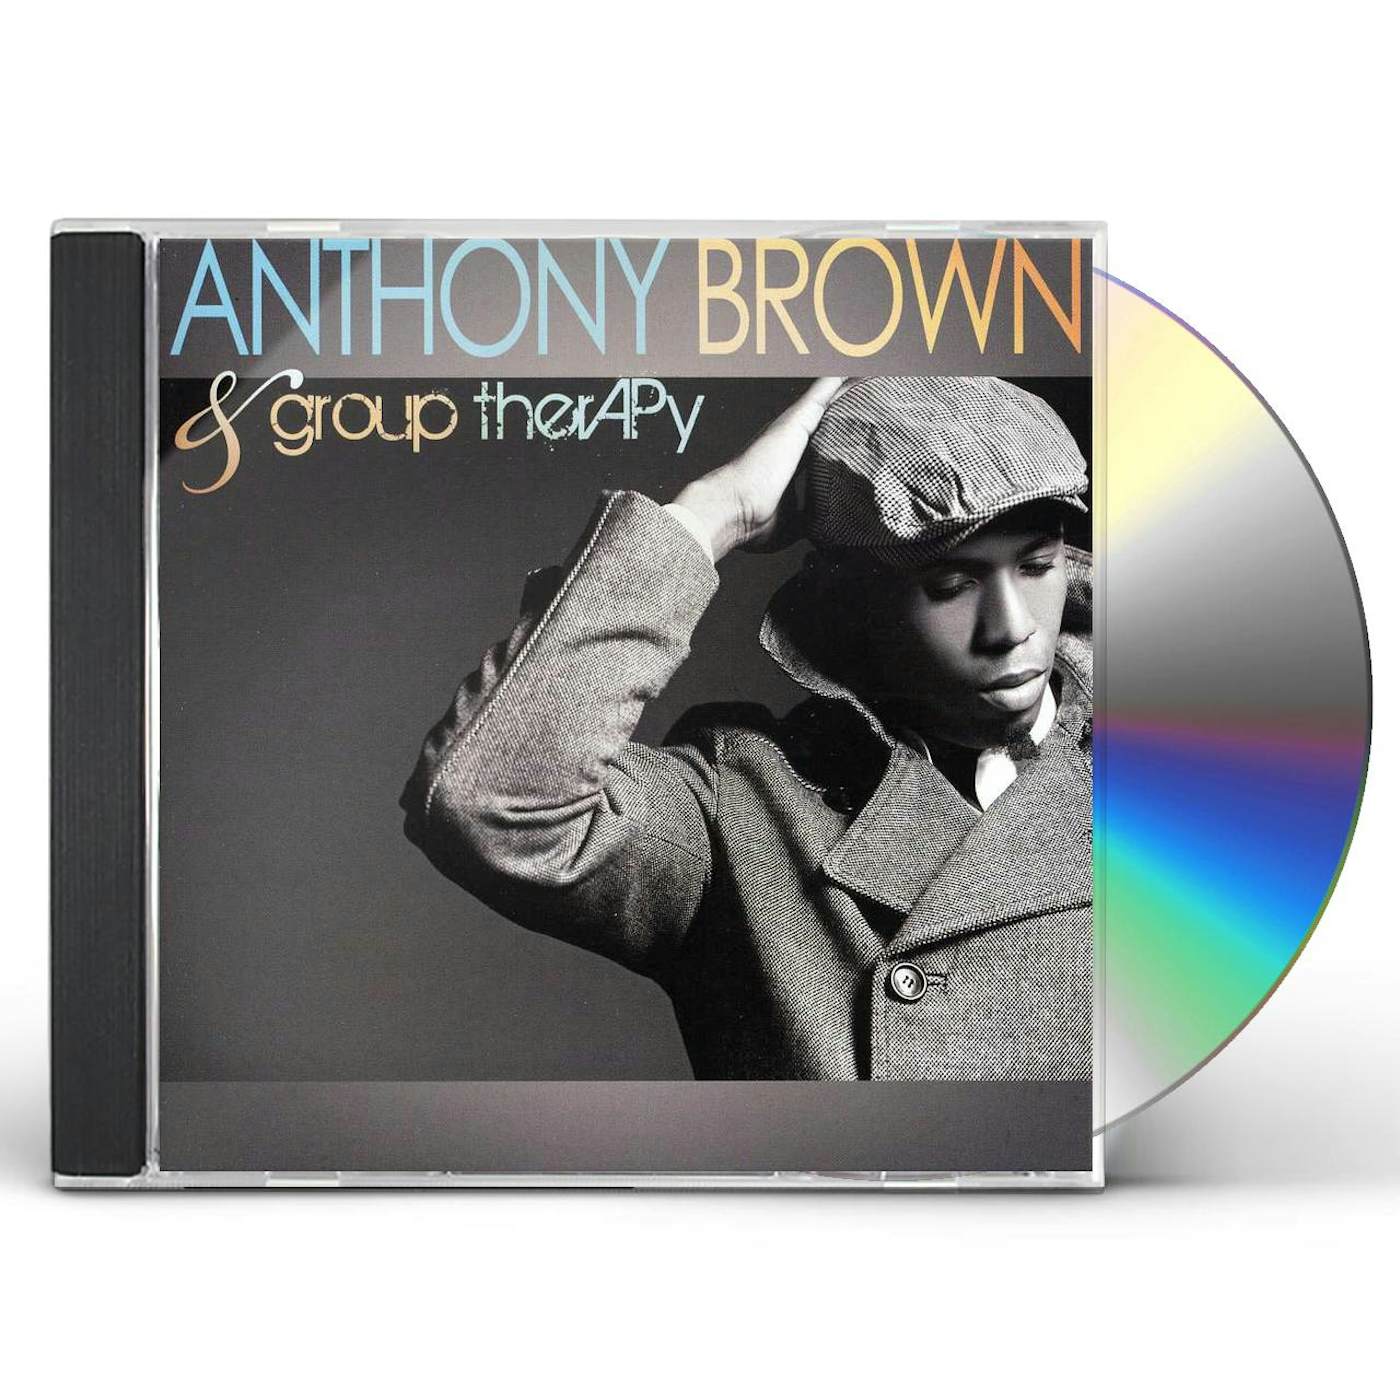 ANTHONY BROWN & GROUP THERAPY CD